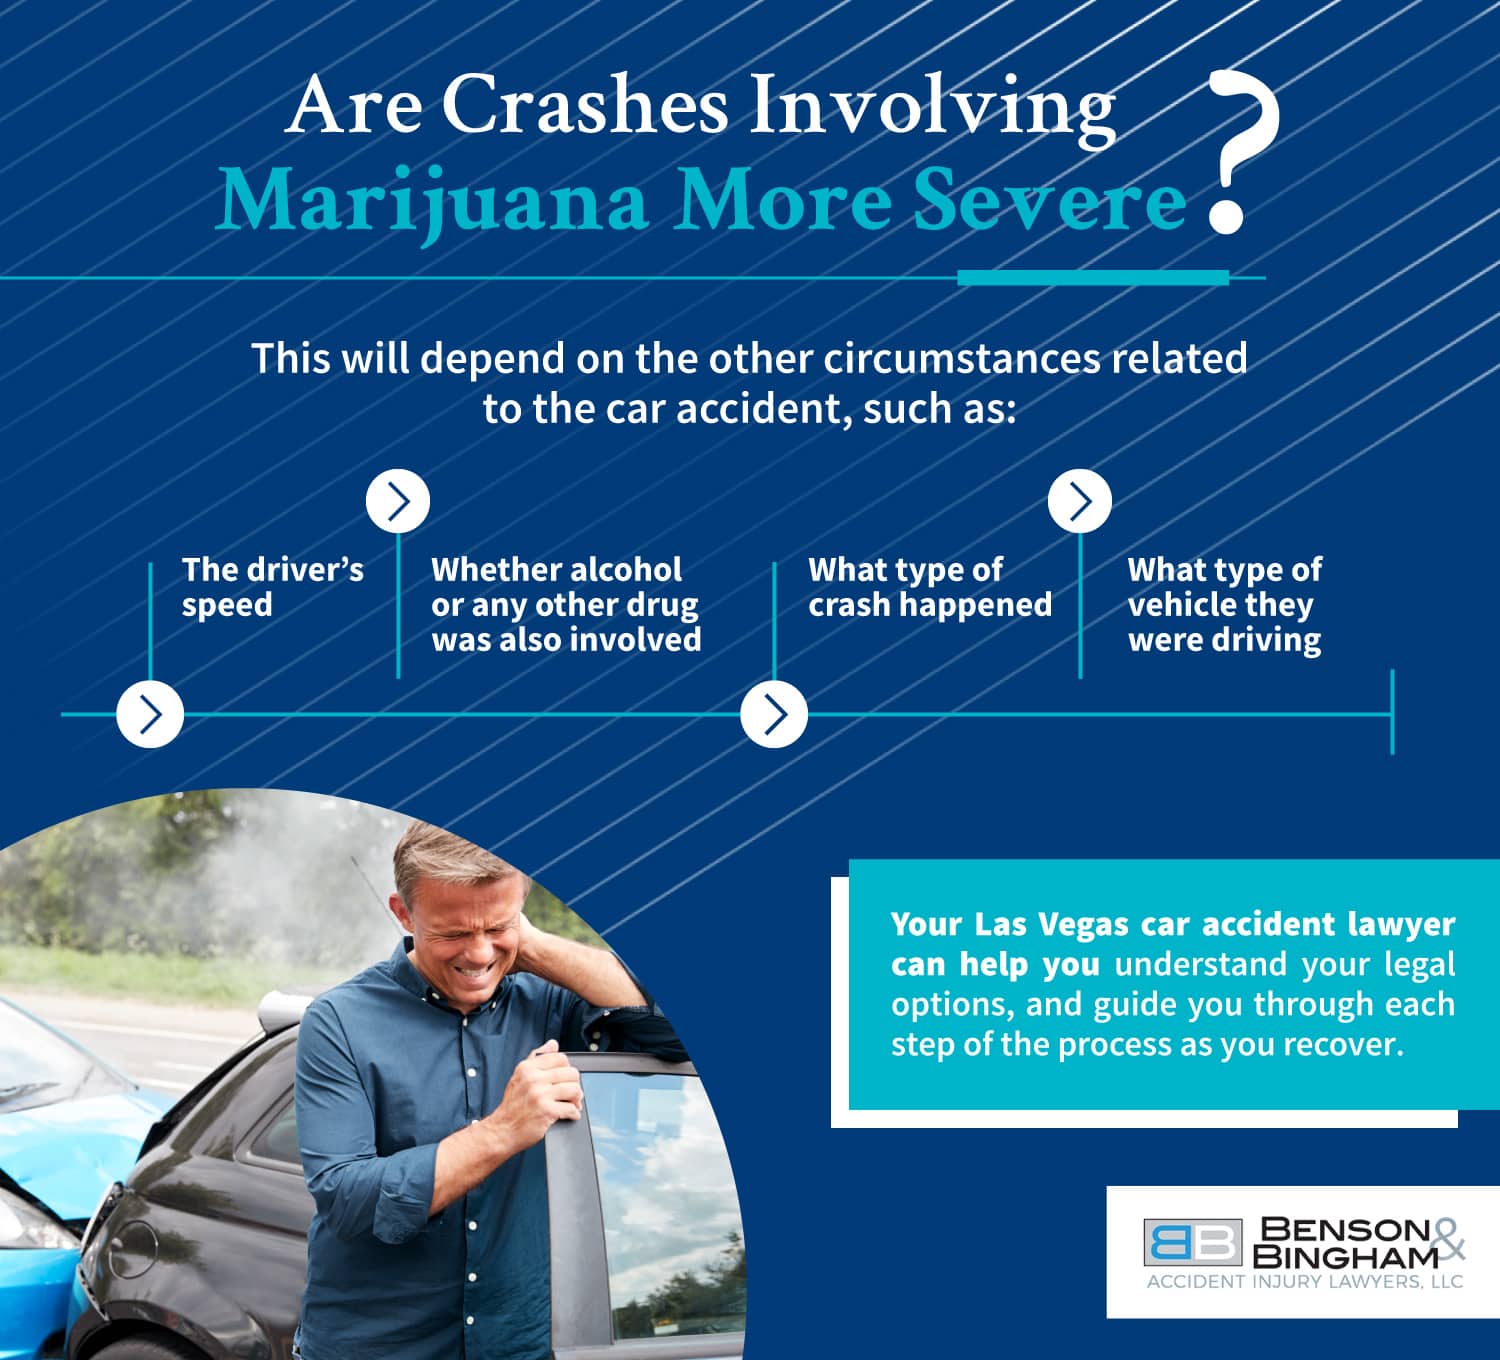 Infographic that shows whether crashes involving marijuana are more severe